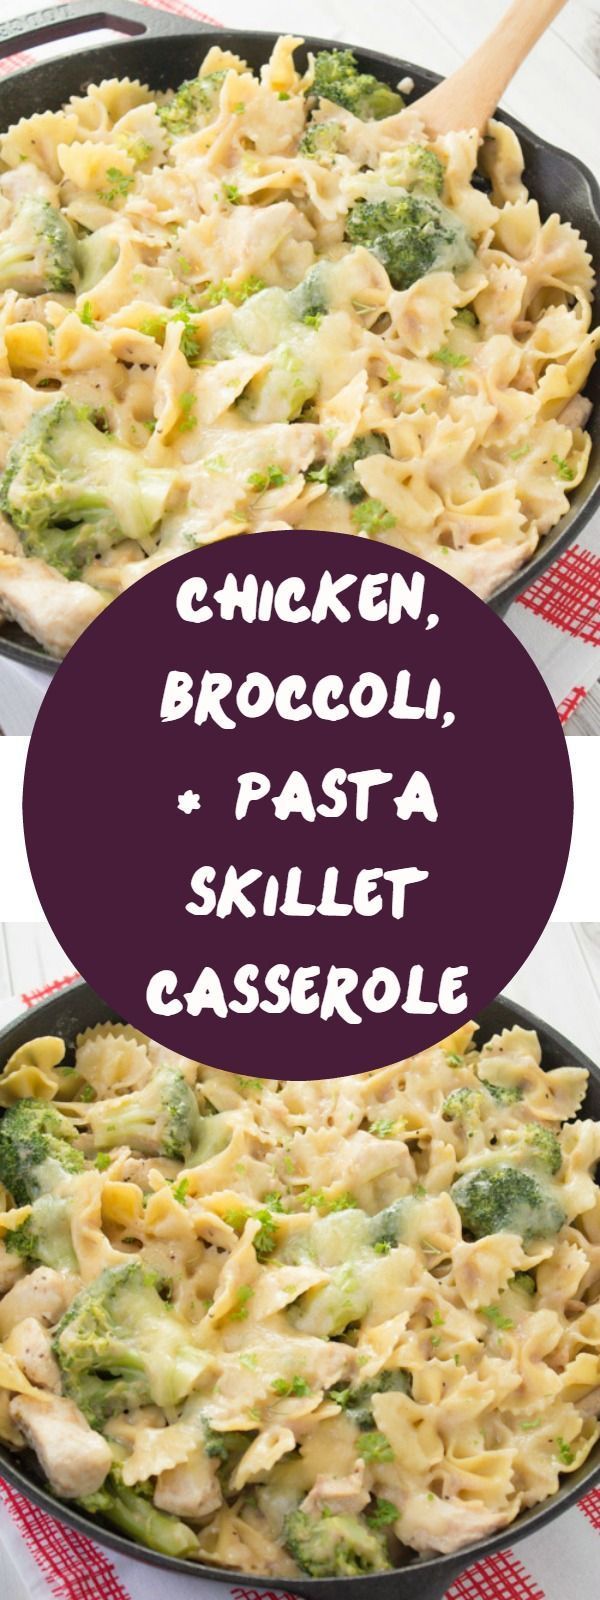 If you are a fan of pasta recipes, then you are going to love this chicken pasta casserole! It’s packed with broccoli, pasta,